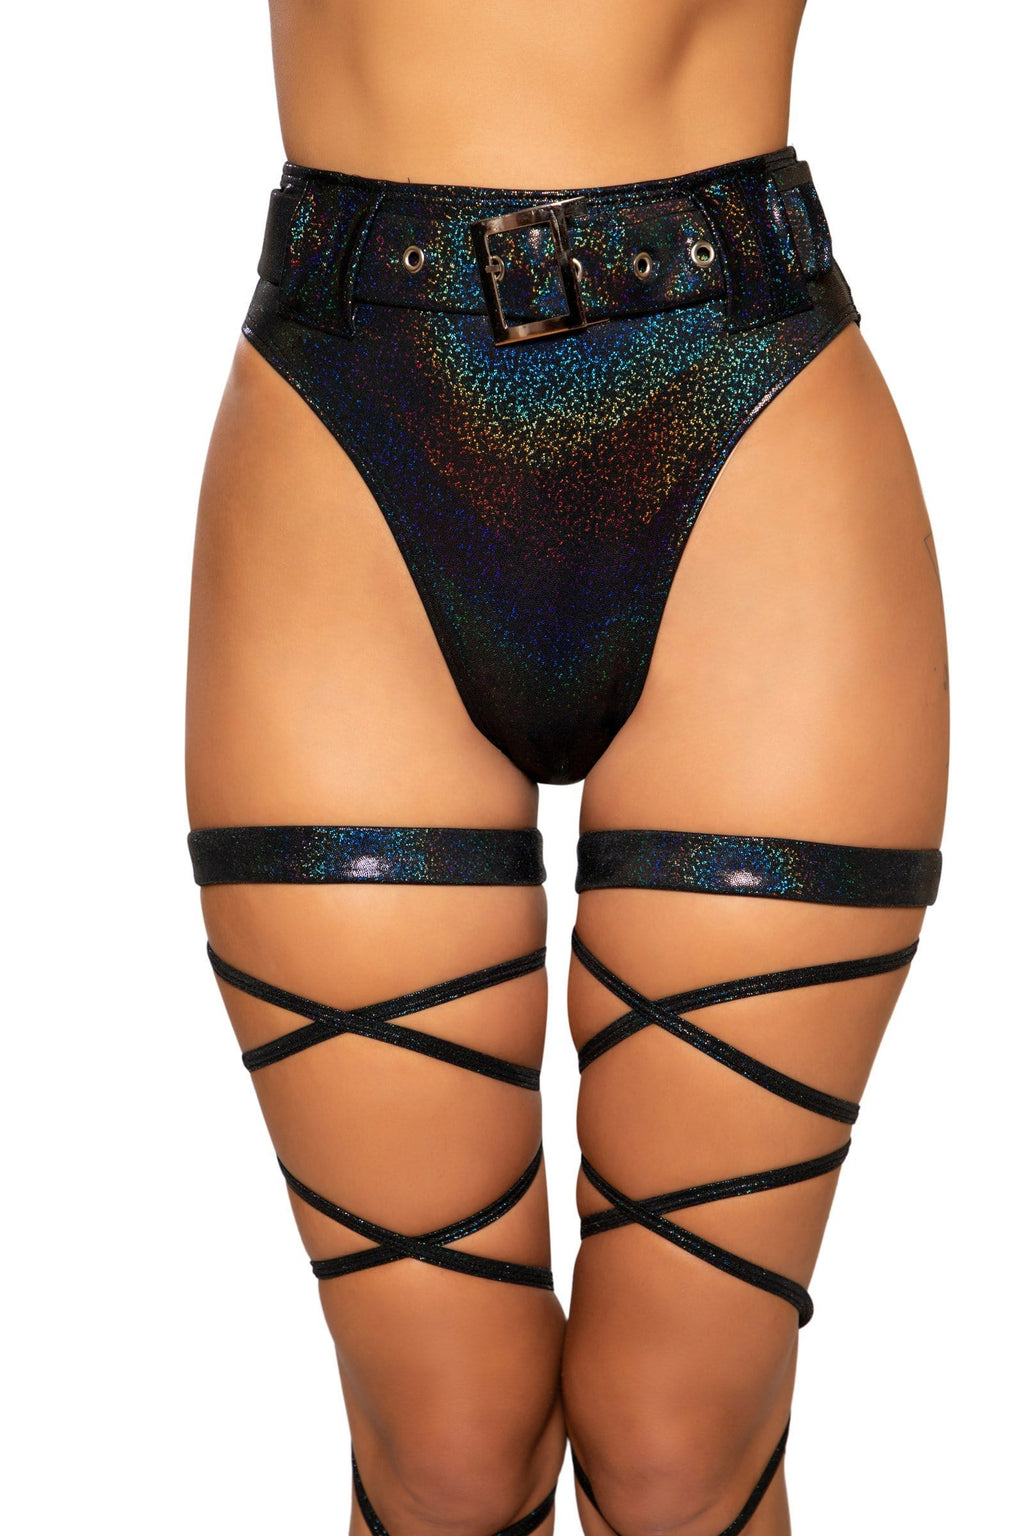 High-Waist Rave Booty Shorts with Belt